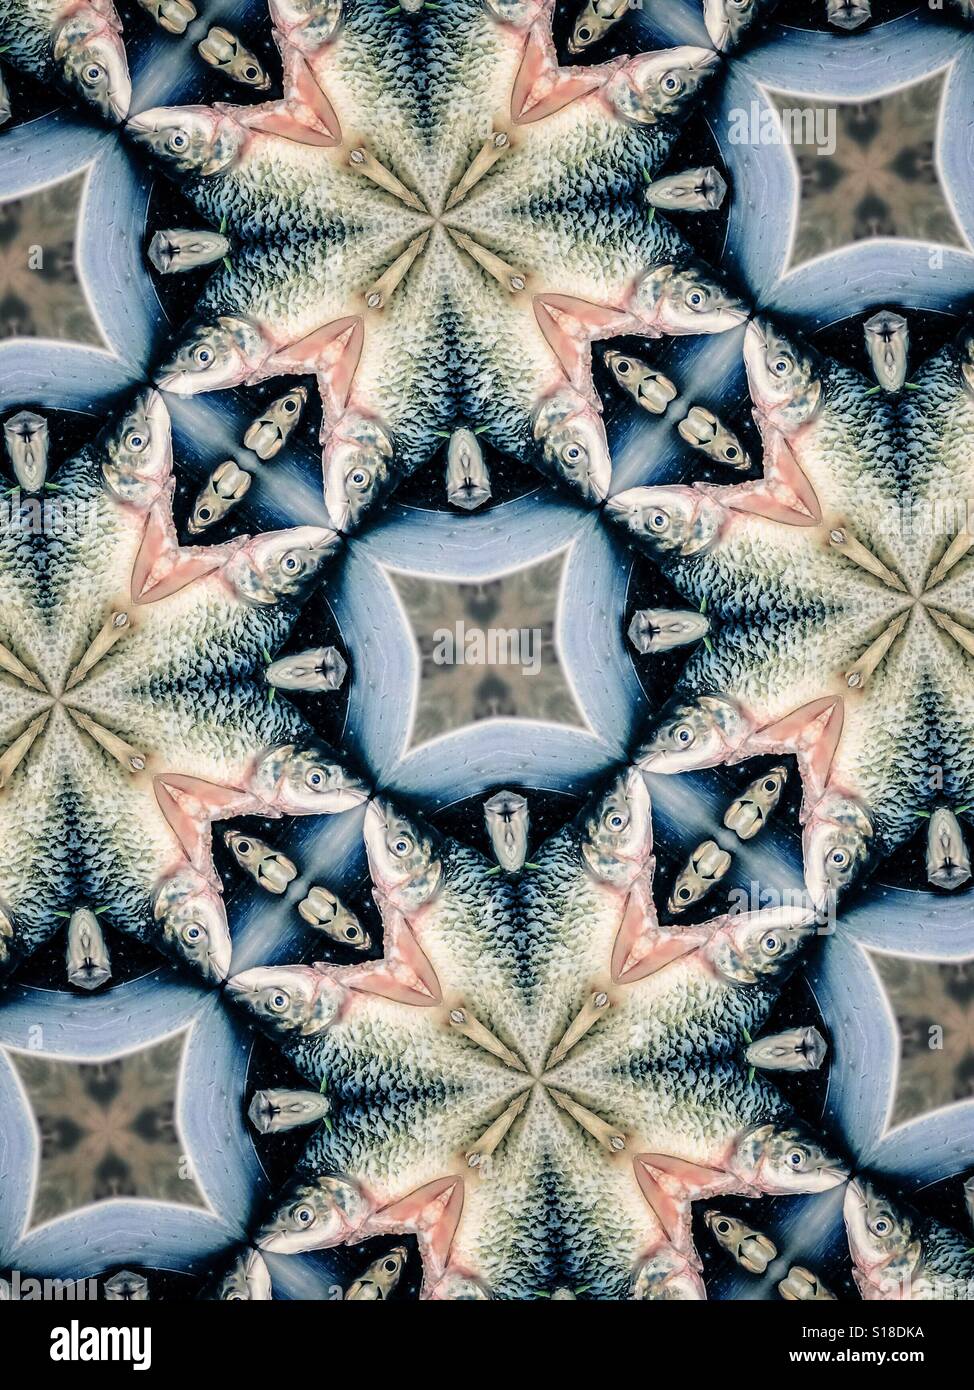 An abstract design of fish in starburst patterns Stock Photo